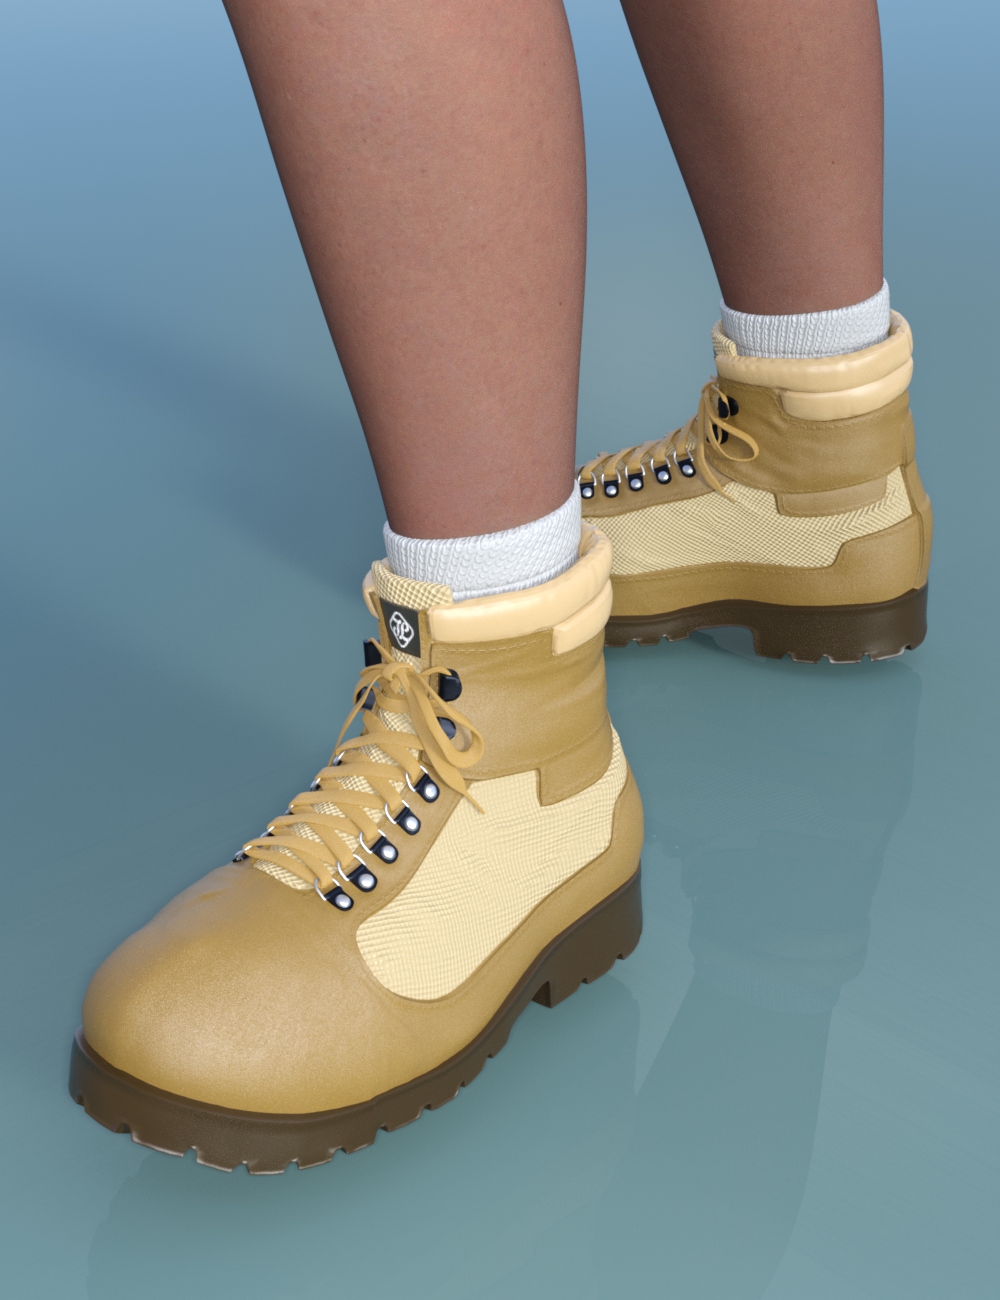 JL Short Boots for Genesis 9 by: Jerry Jang, 3D Models by Daz 3D